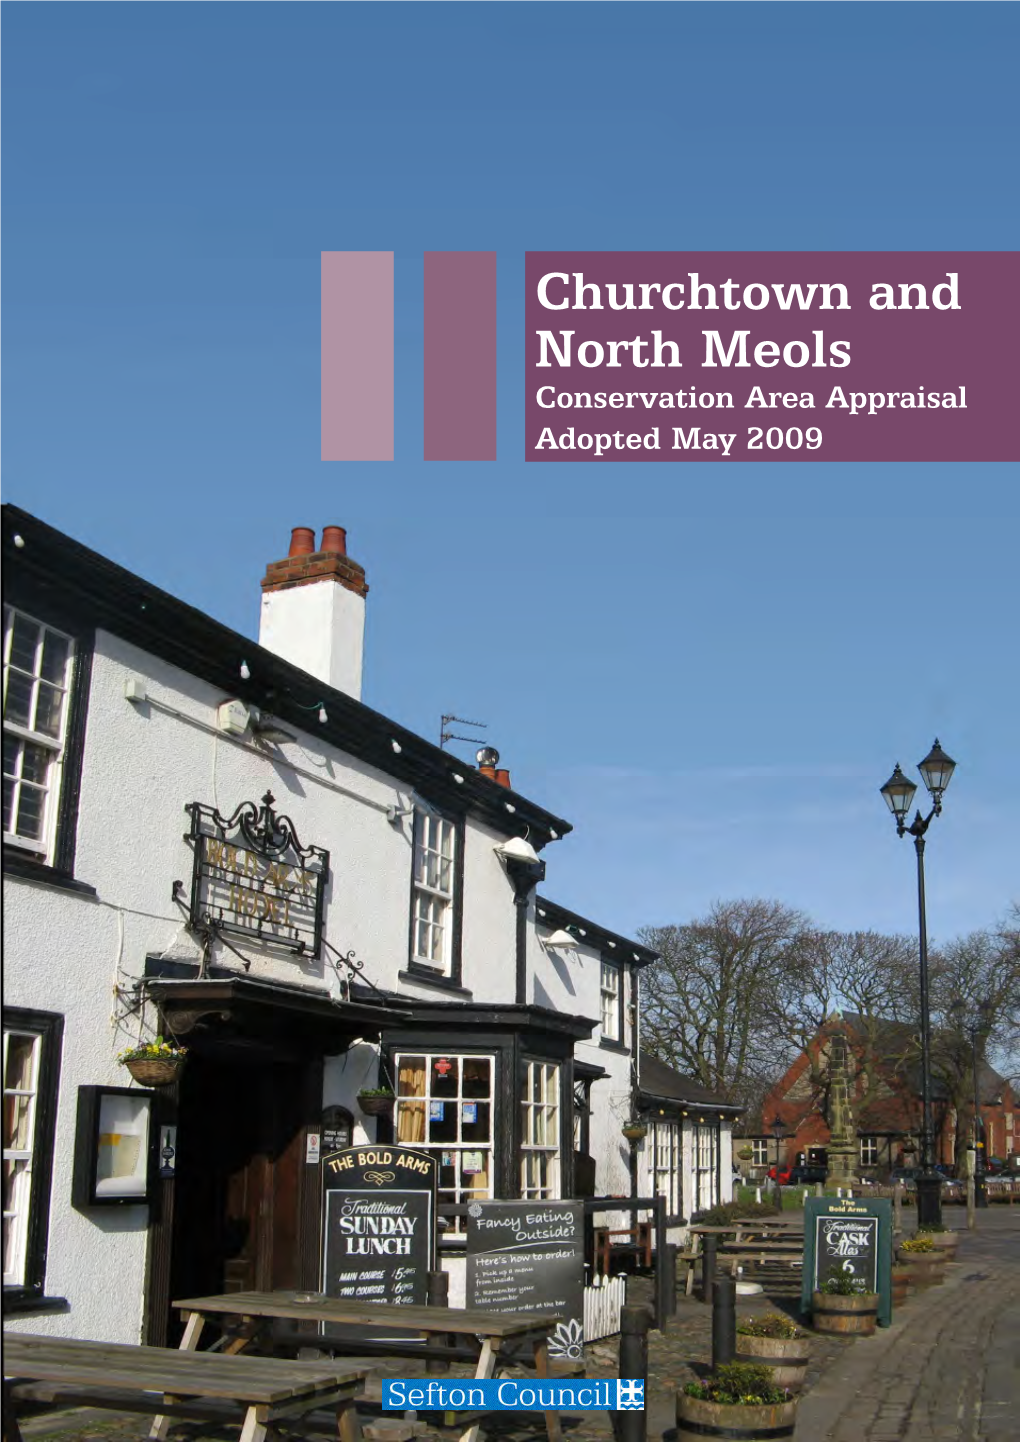 Churchtown and North Meols Conservation Area Appraisal